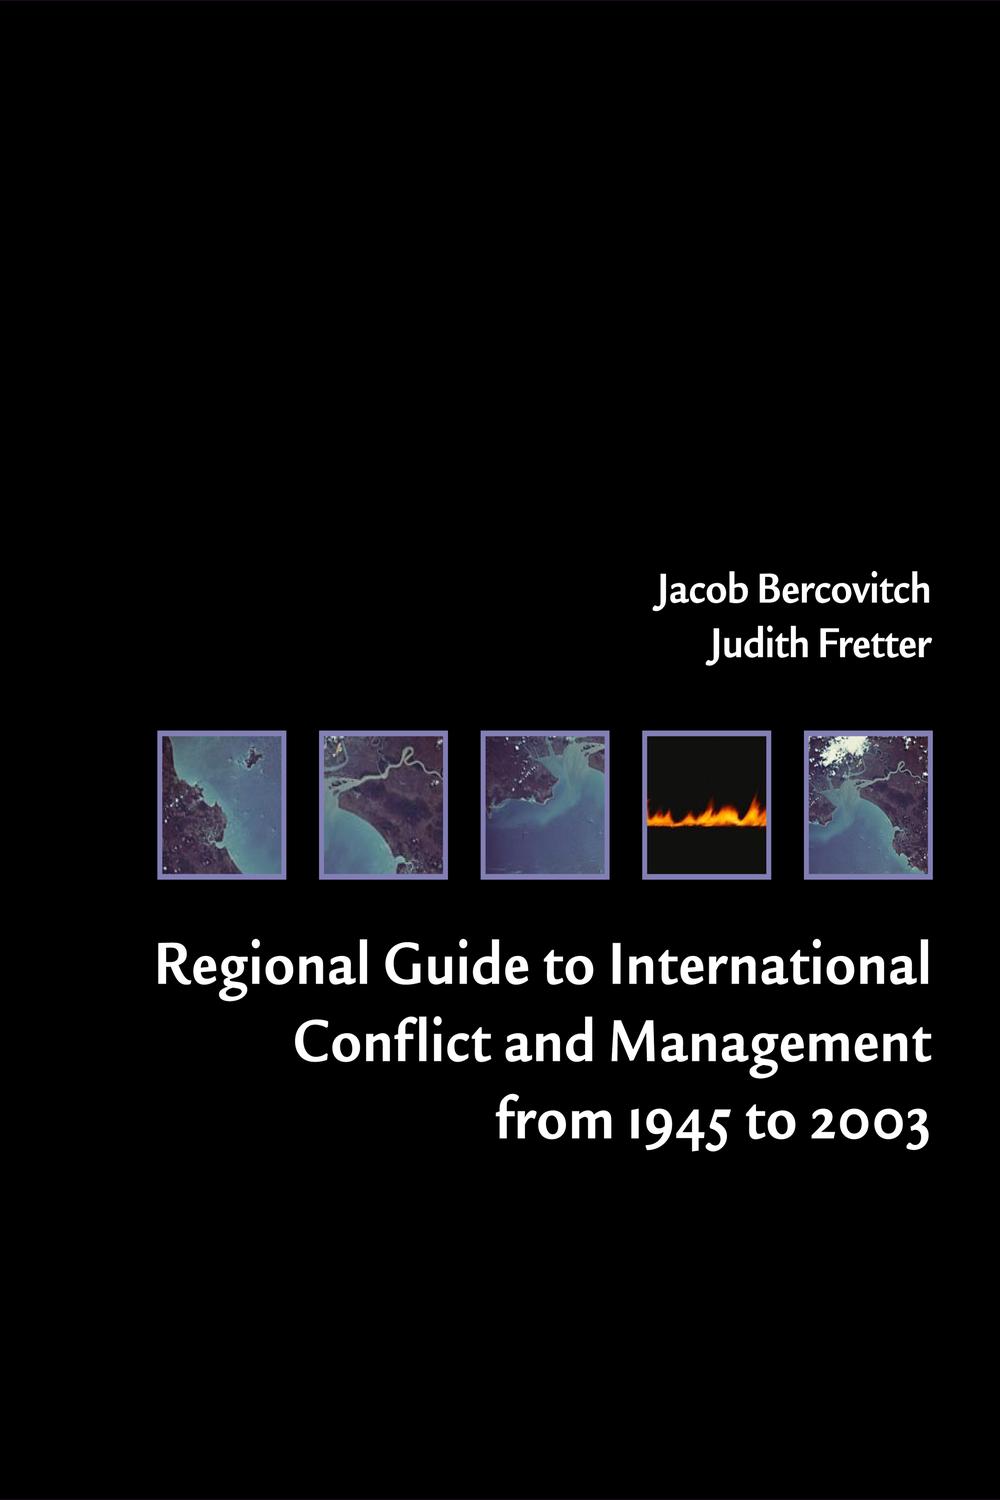 Regional Guide to International Conflict and Management from 1945 to 2003 - Jacob Bercovitch, Judith Fretter